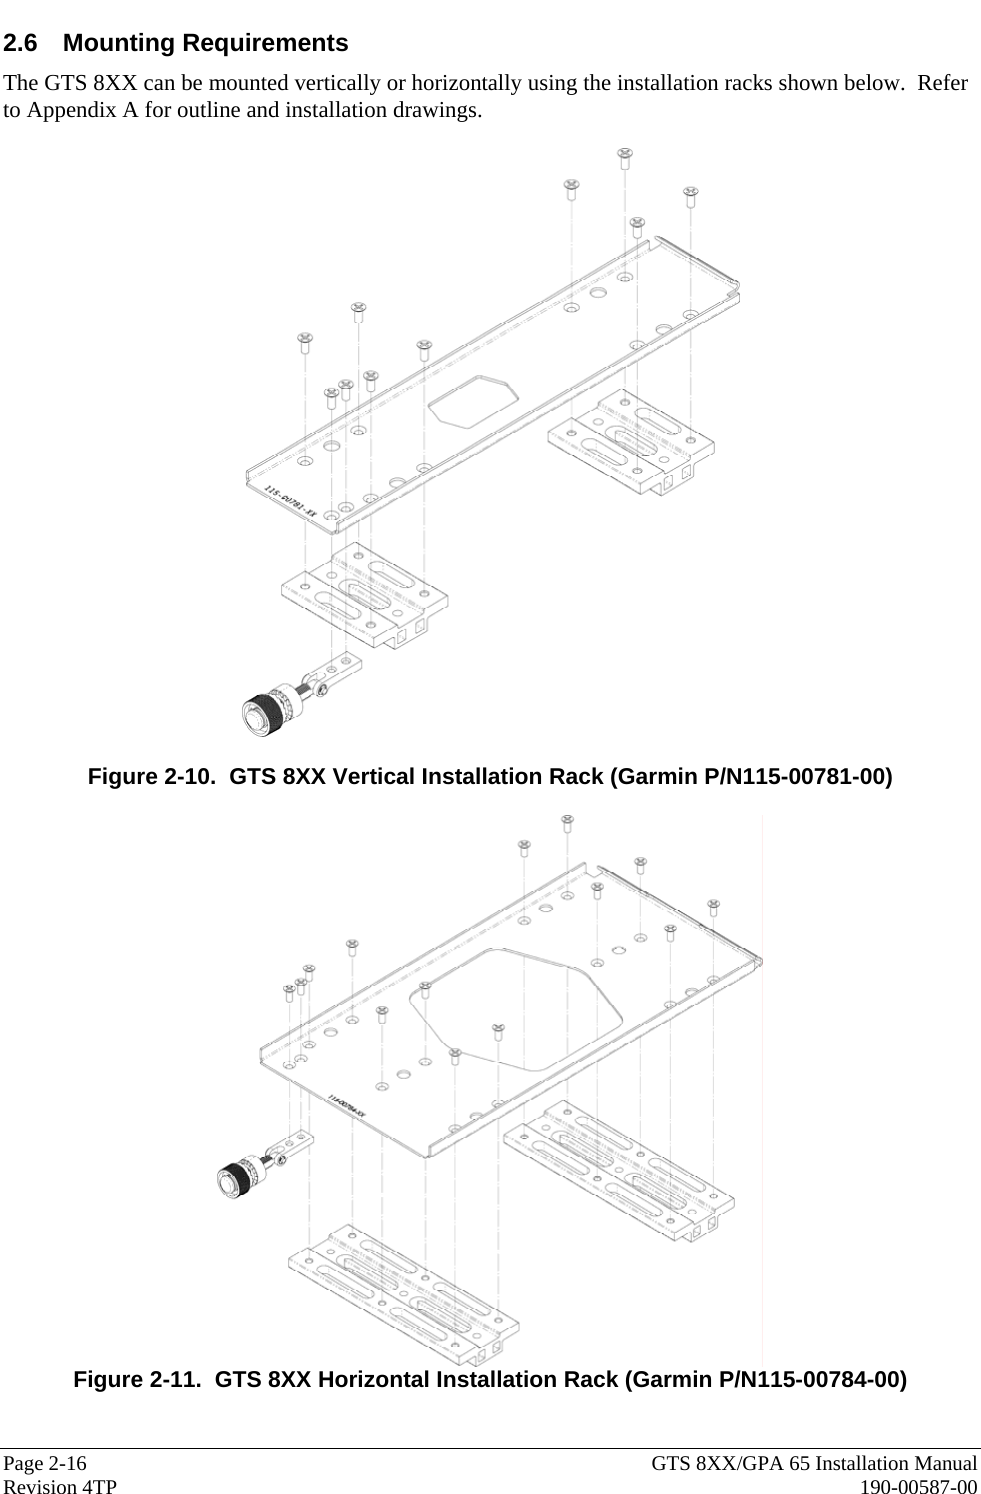  Page 2-16  GTS 8XX/GPA 65 Installation Manual Revision 4TP  190-00587-00 2.6 Mounting Requirements The GTS 8XX can be mounted vertically or horizontally using the installation racks shown below.  Refer to Appendix A for outline and installation drawings.    Figure 2-10.  GTS 8XX Vertical Installation Rack (Garmin P/N115-00781-00)   Figure 2-11.  GTS 8XX Horizontal Installation Rack (Garmin P/N115-00784-00) 